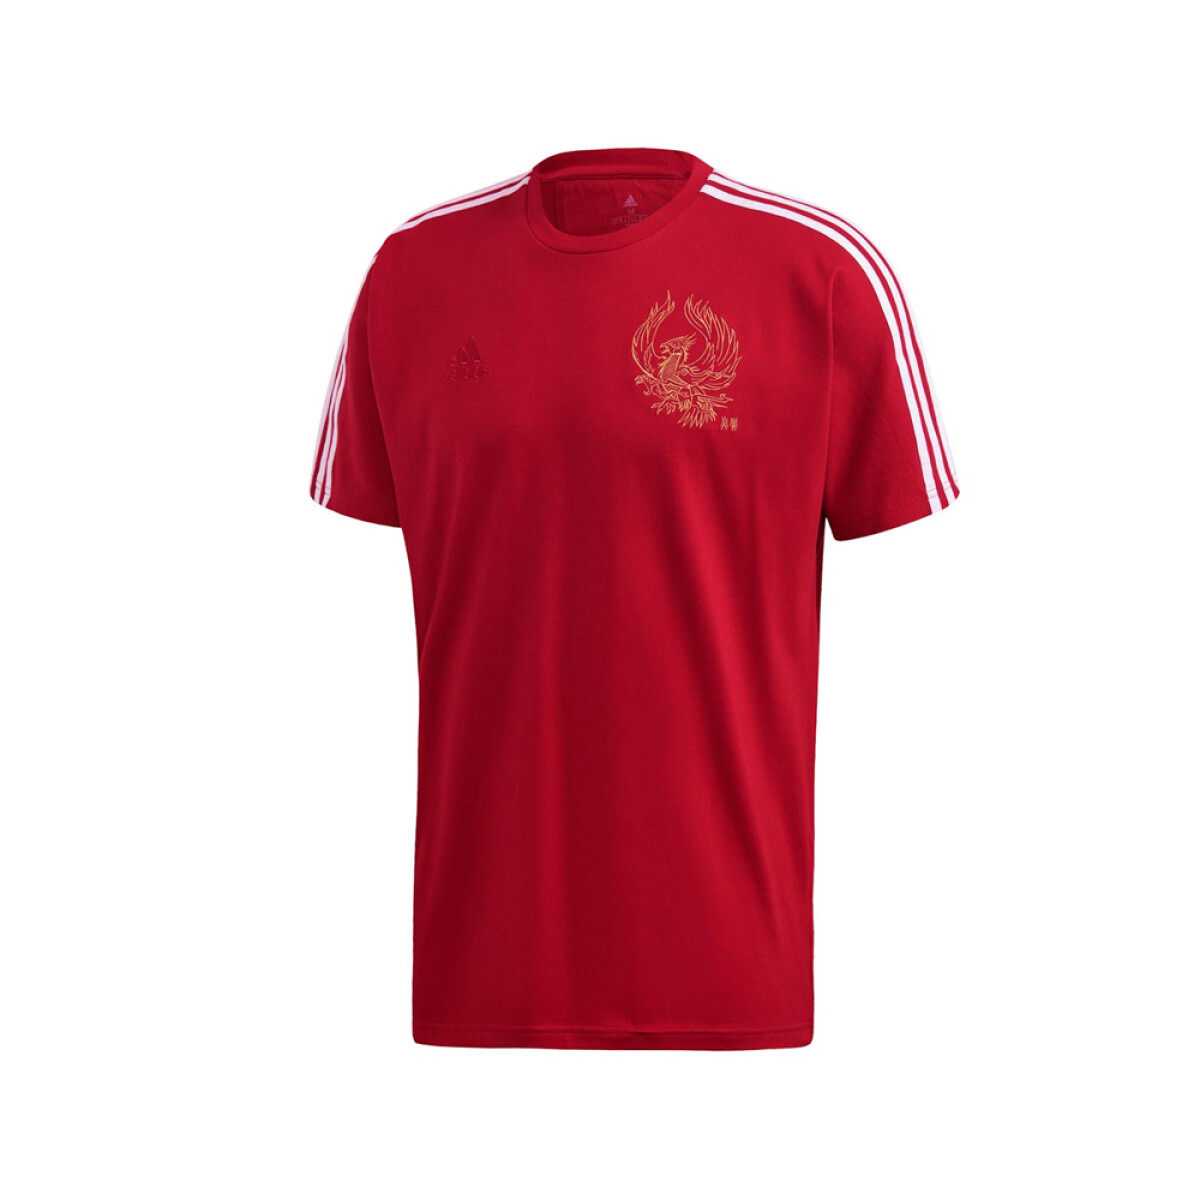 AFC CNY TEE - Red 